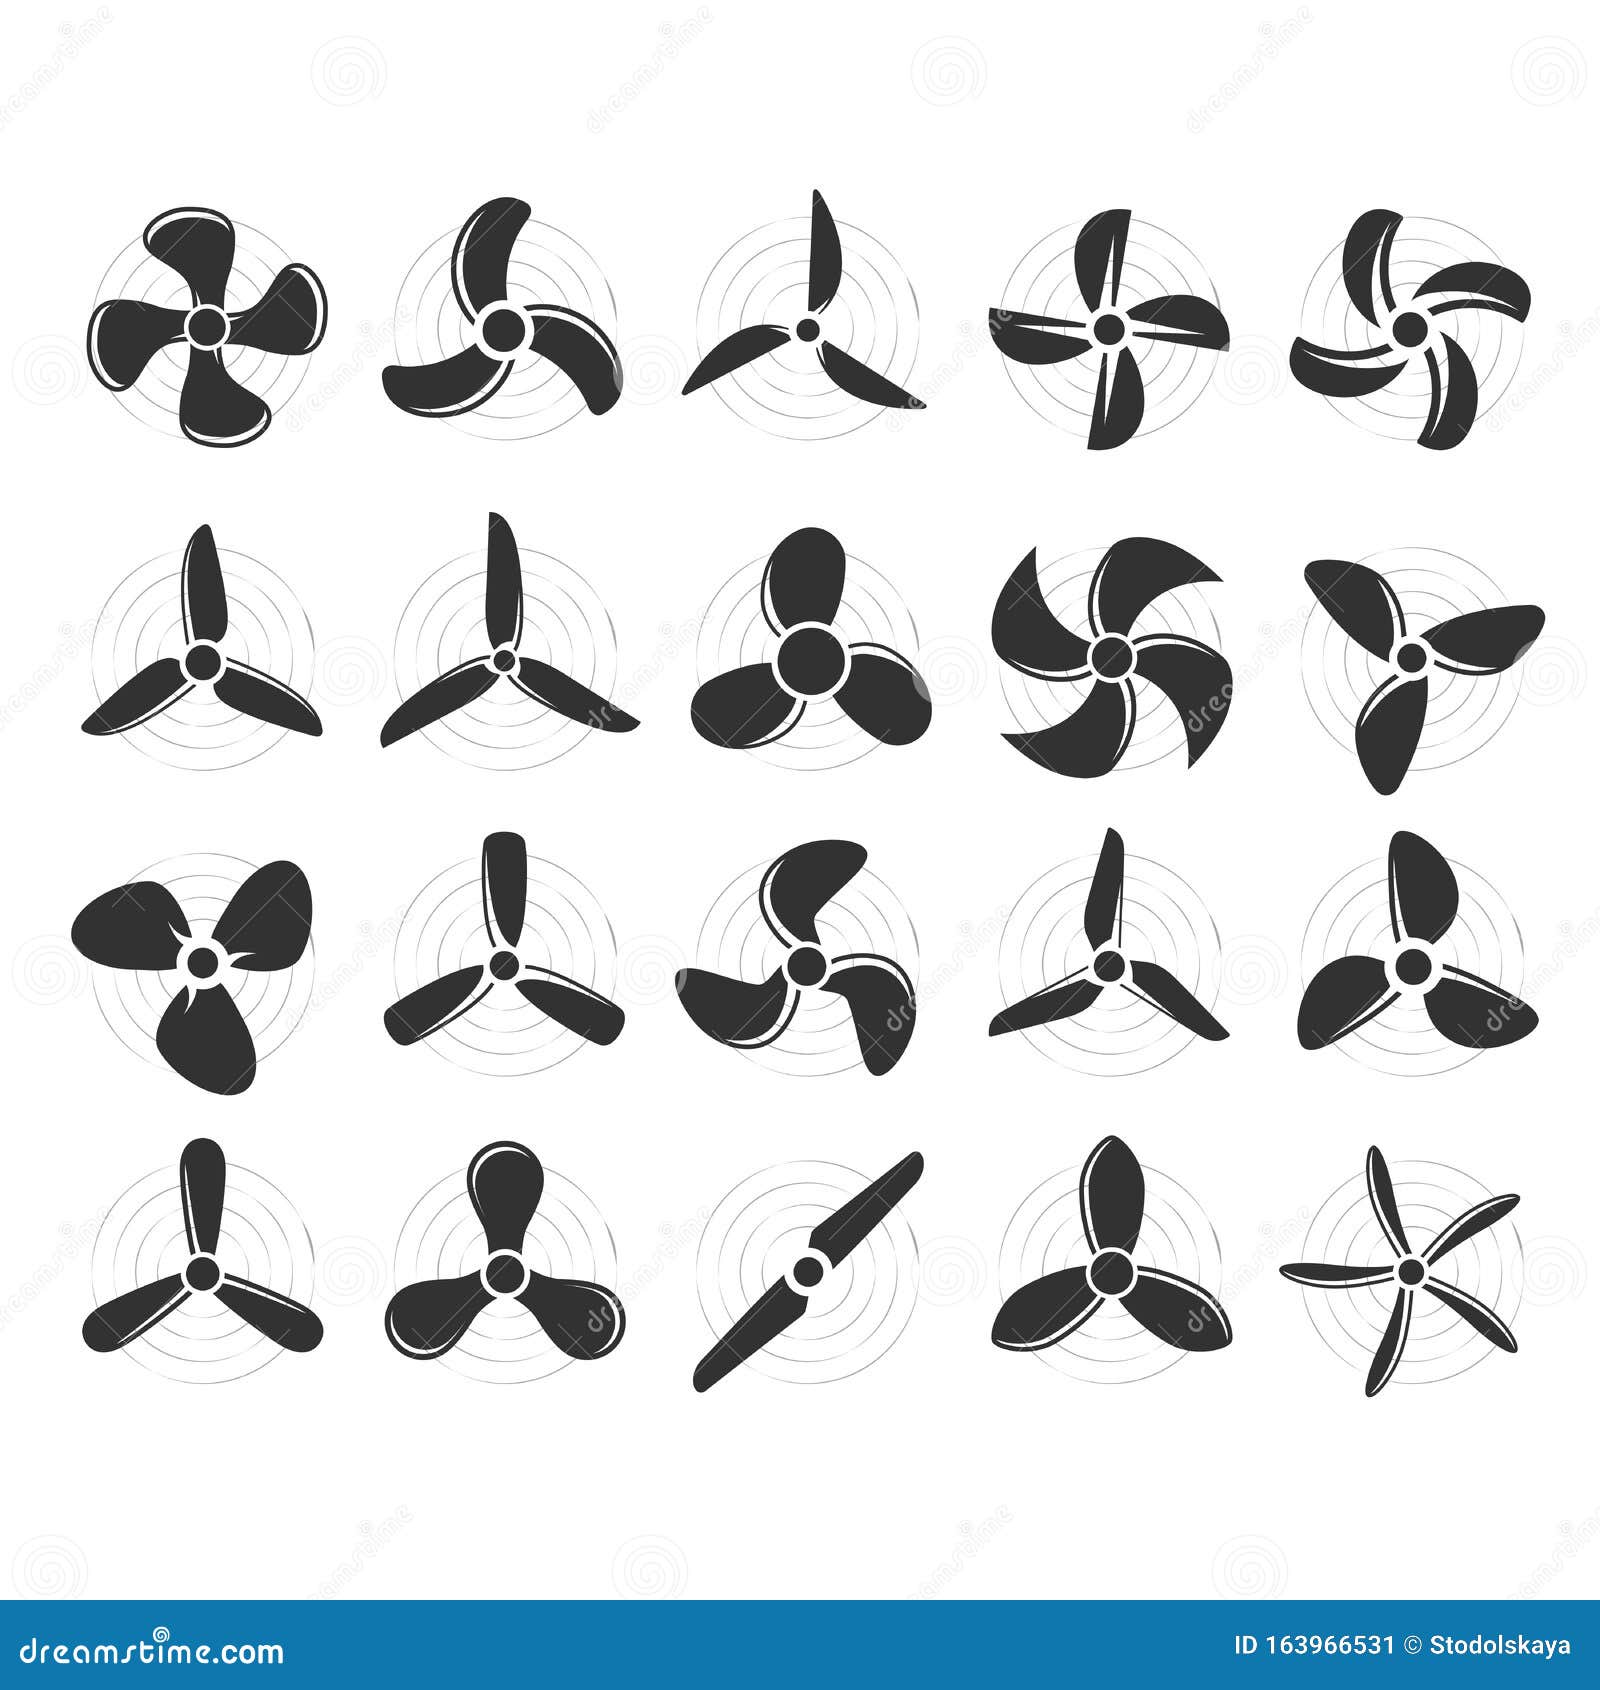 plane propellers set - fan, rotor mover, aircraft propeller icons, wind fan rotating prop, airscrew